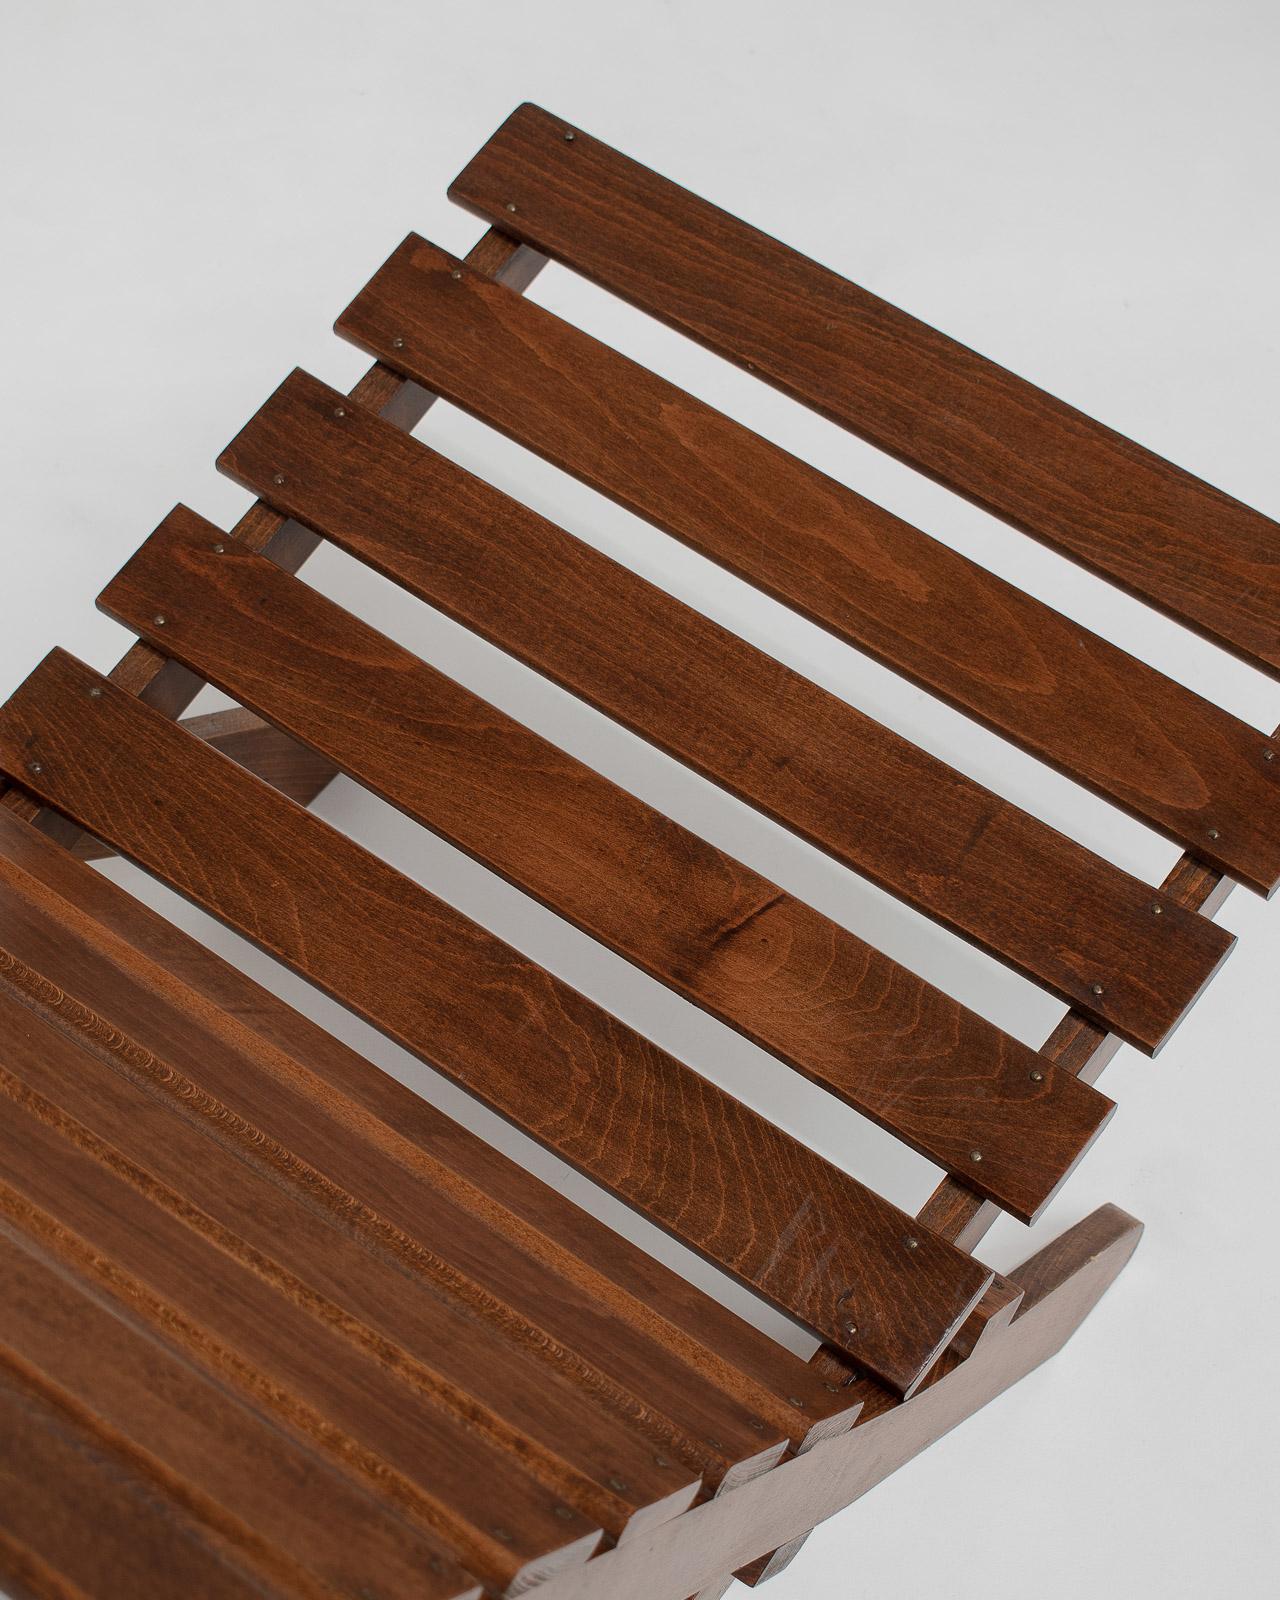 Pair of French Folding Chairs in Stained Teak, France 1950s For Sale 5